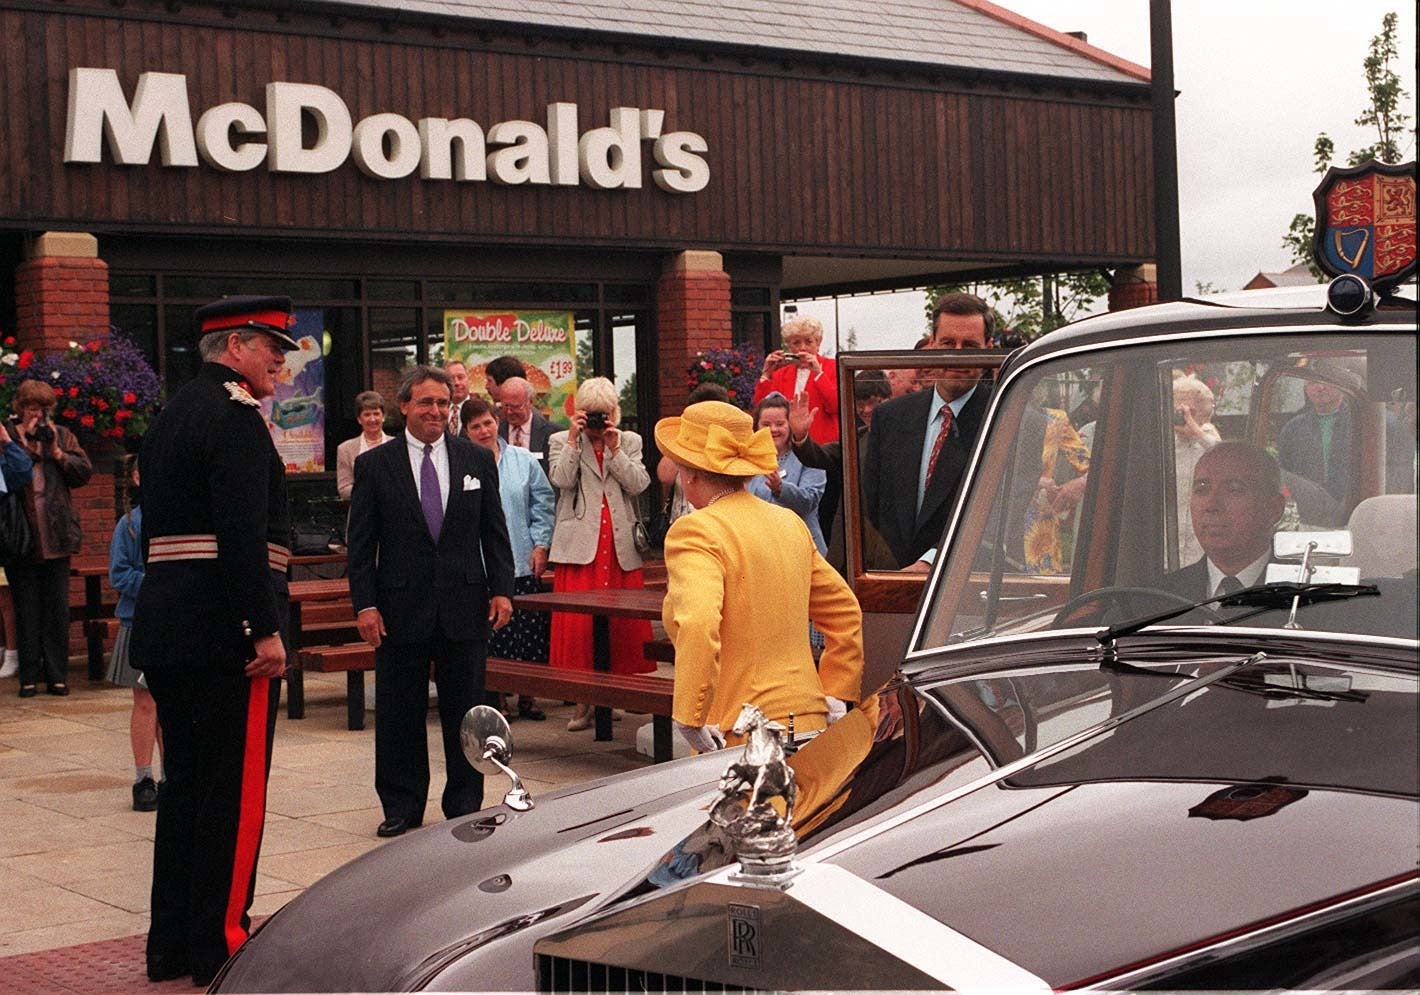 The Queen arrives at a McDonald’s restaurant in Cheshire in 1998